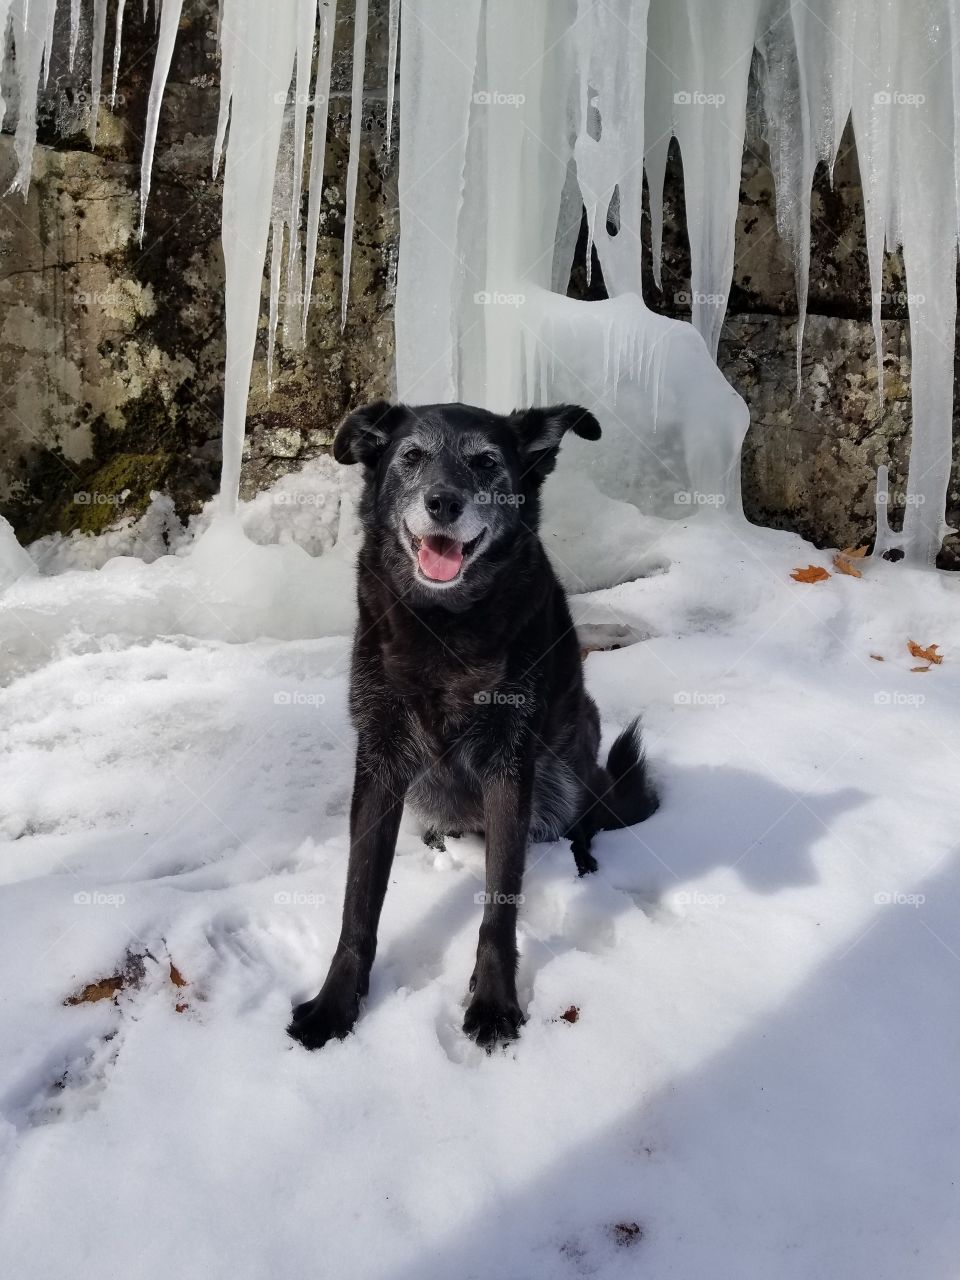 Dogs and icicles